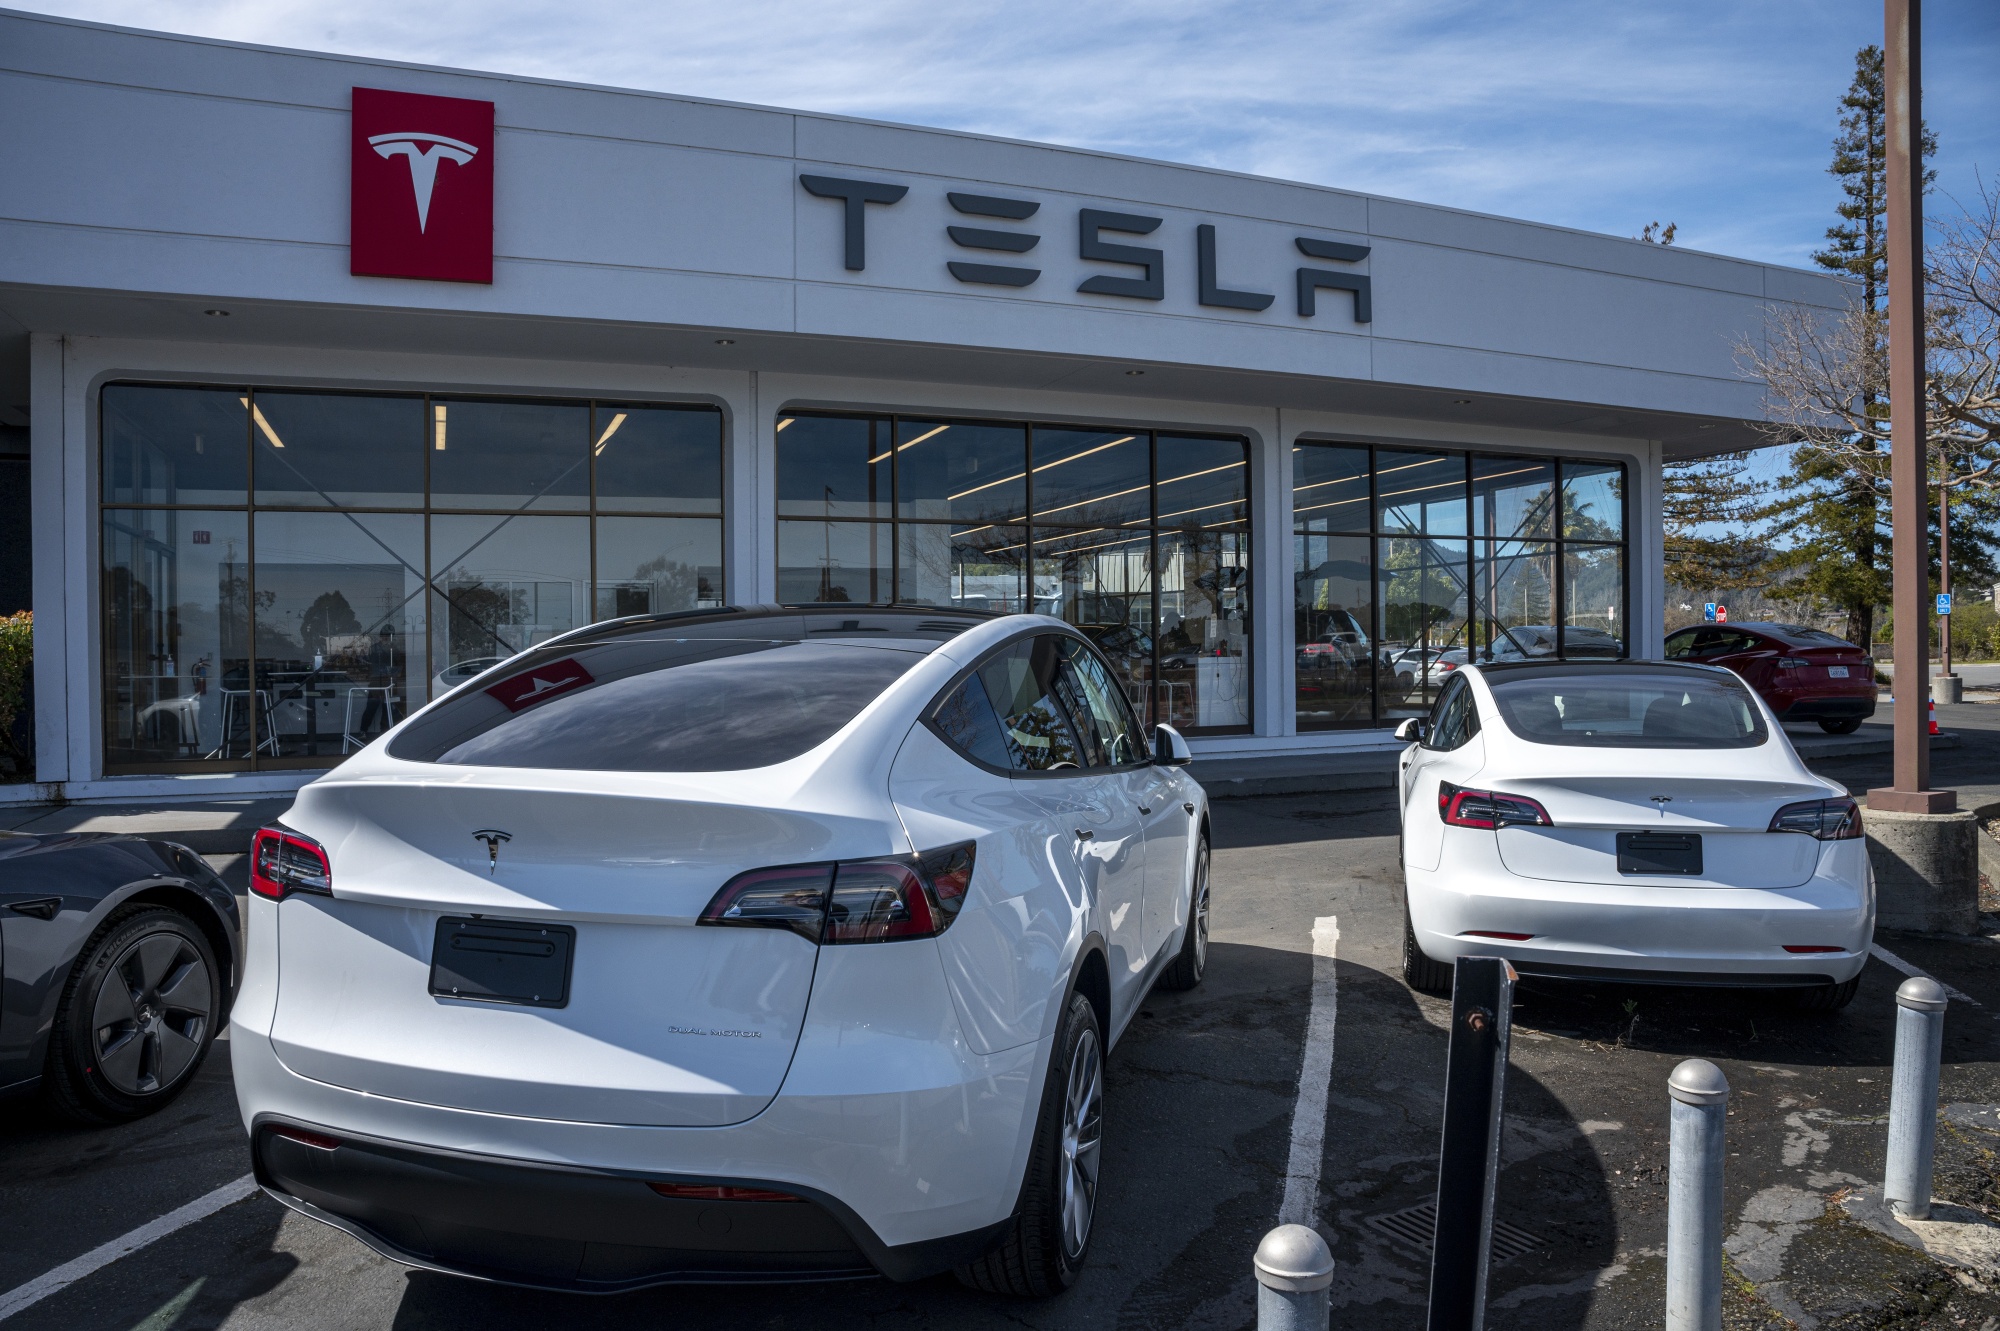 Tesla Needs to Sell Cheaper Cars to Stay Dominant: Analysts